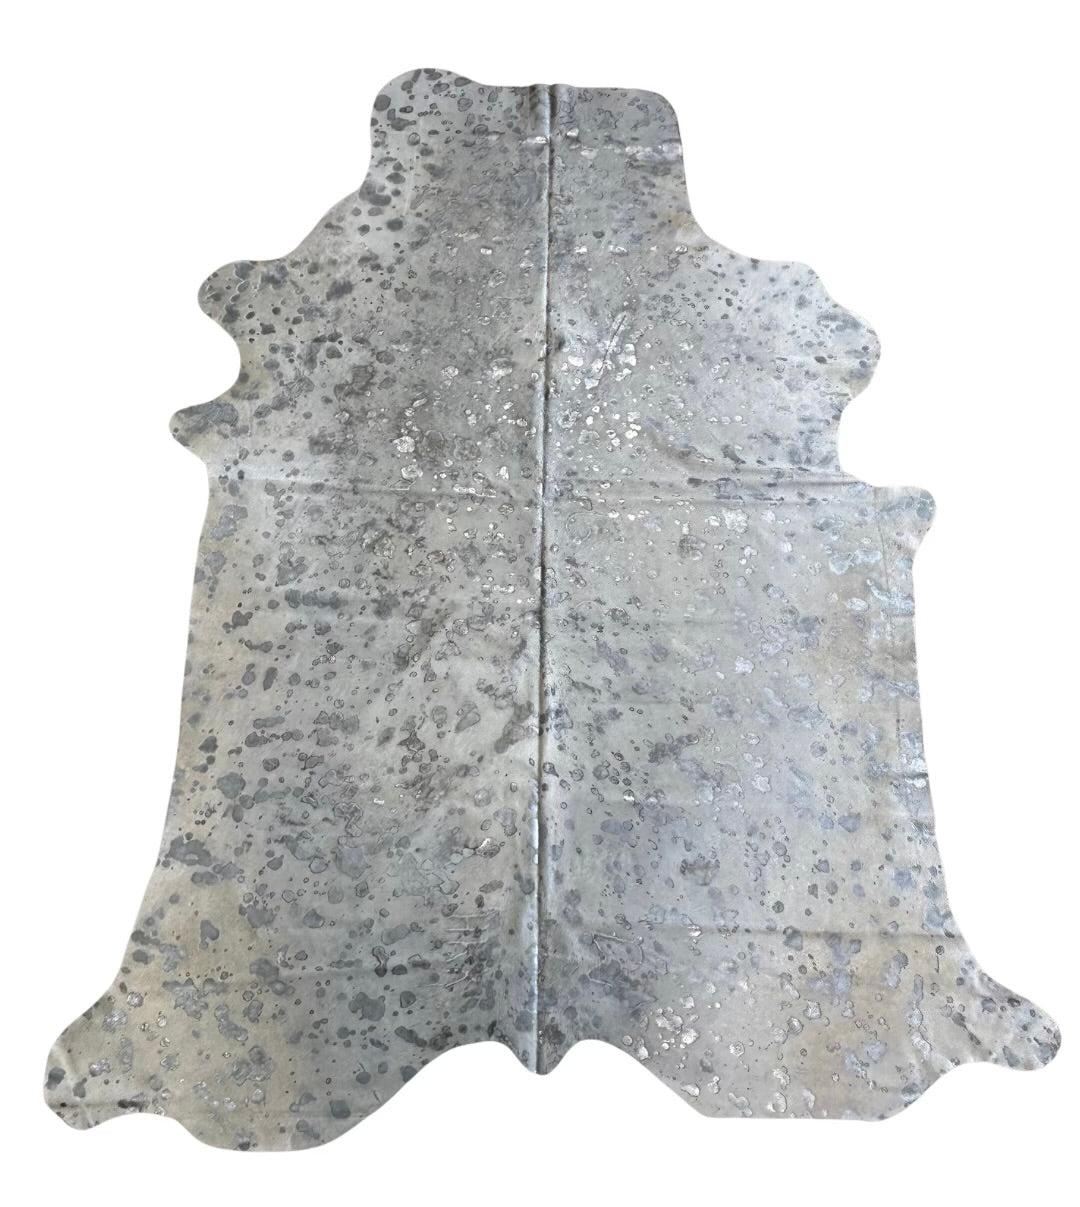 Metallic Cowhide Rug - Light Gray and Silver